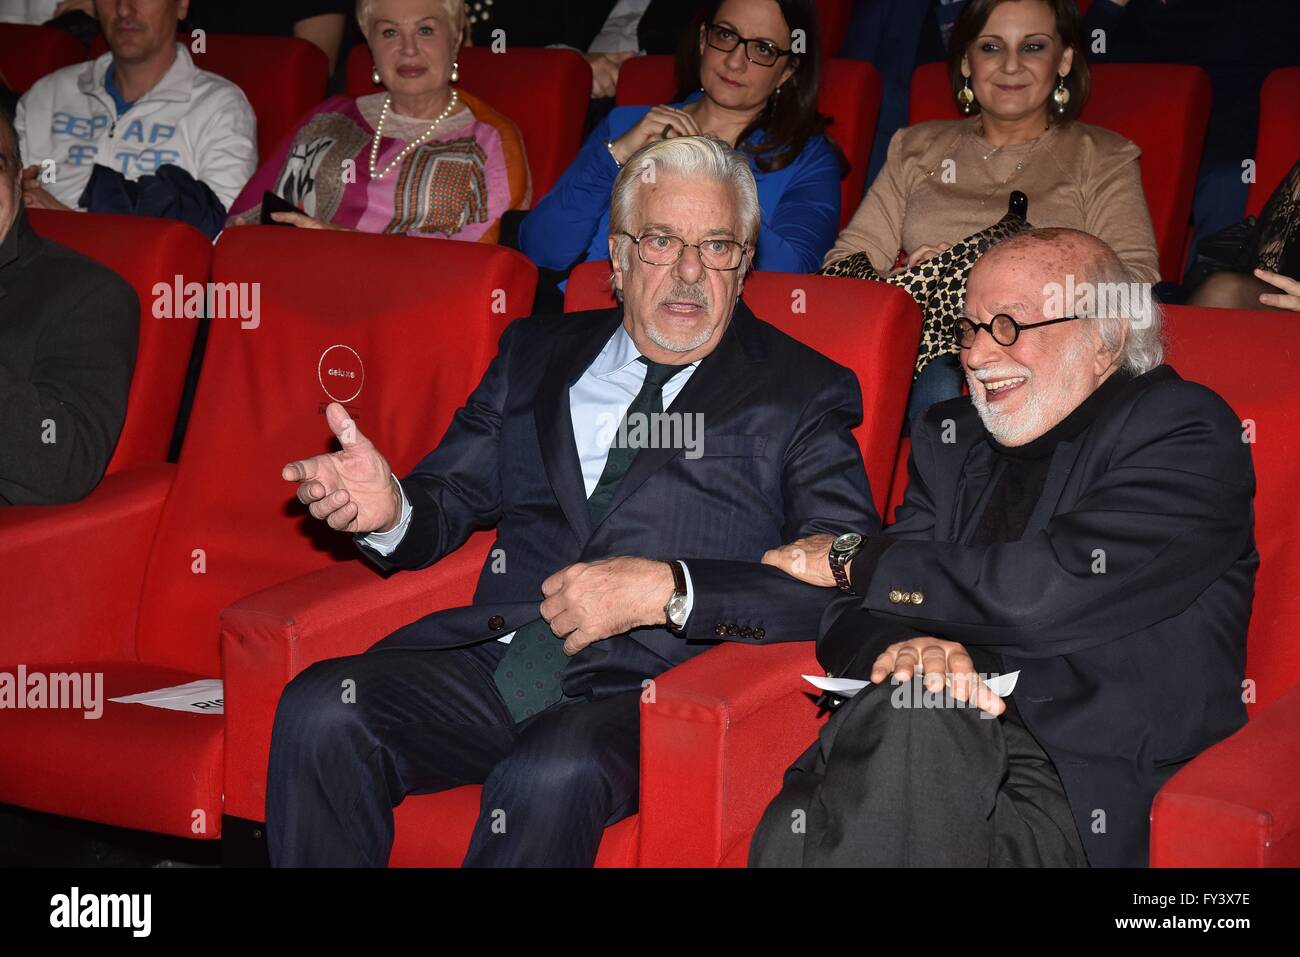 Anna Magnani Award 2016 - Gala  Featuring: Giancarlo Giannini, Adriano Pintaldi Where: Rome, Italy When: 21 Mar 2016 Credit: IPA/WENN.com  **Only available for publication in UK, USA, Germany, Austria, Switzerland** Stock Photo